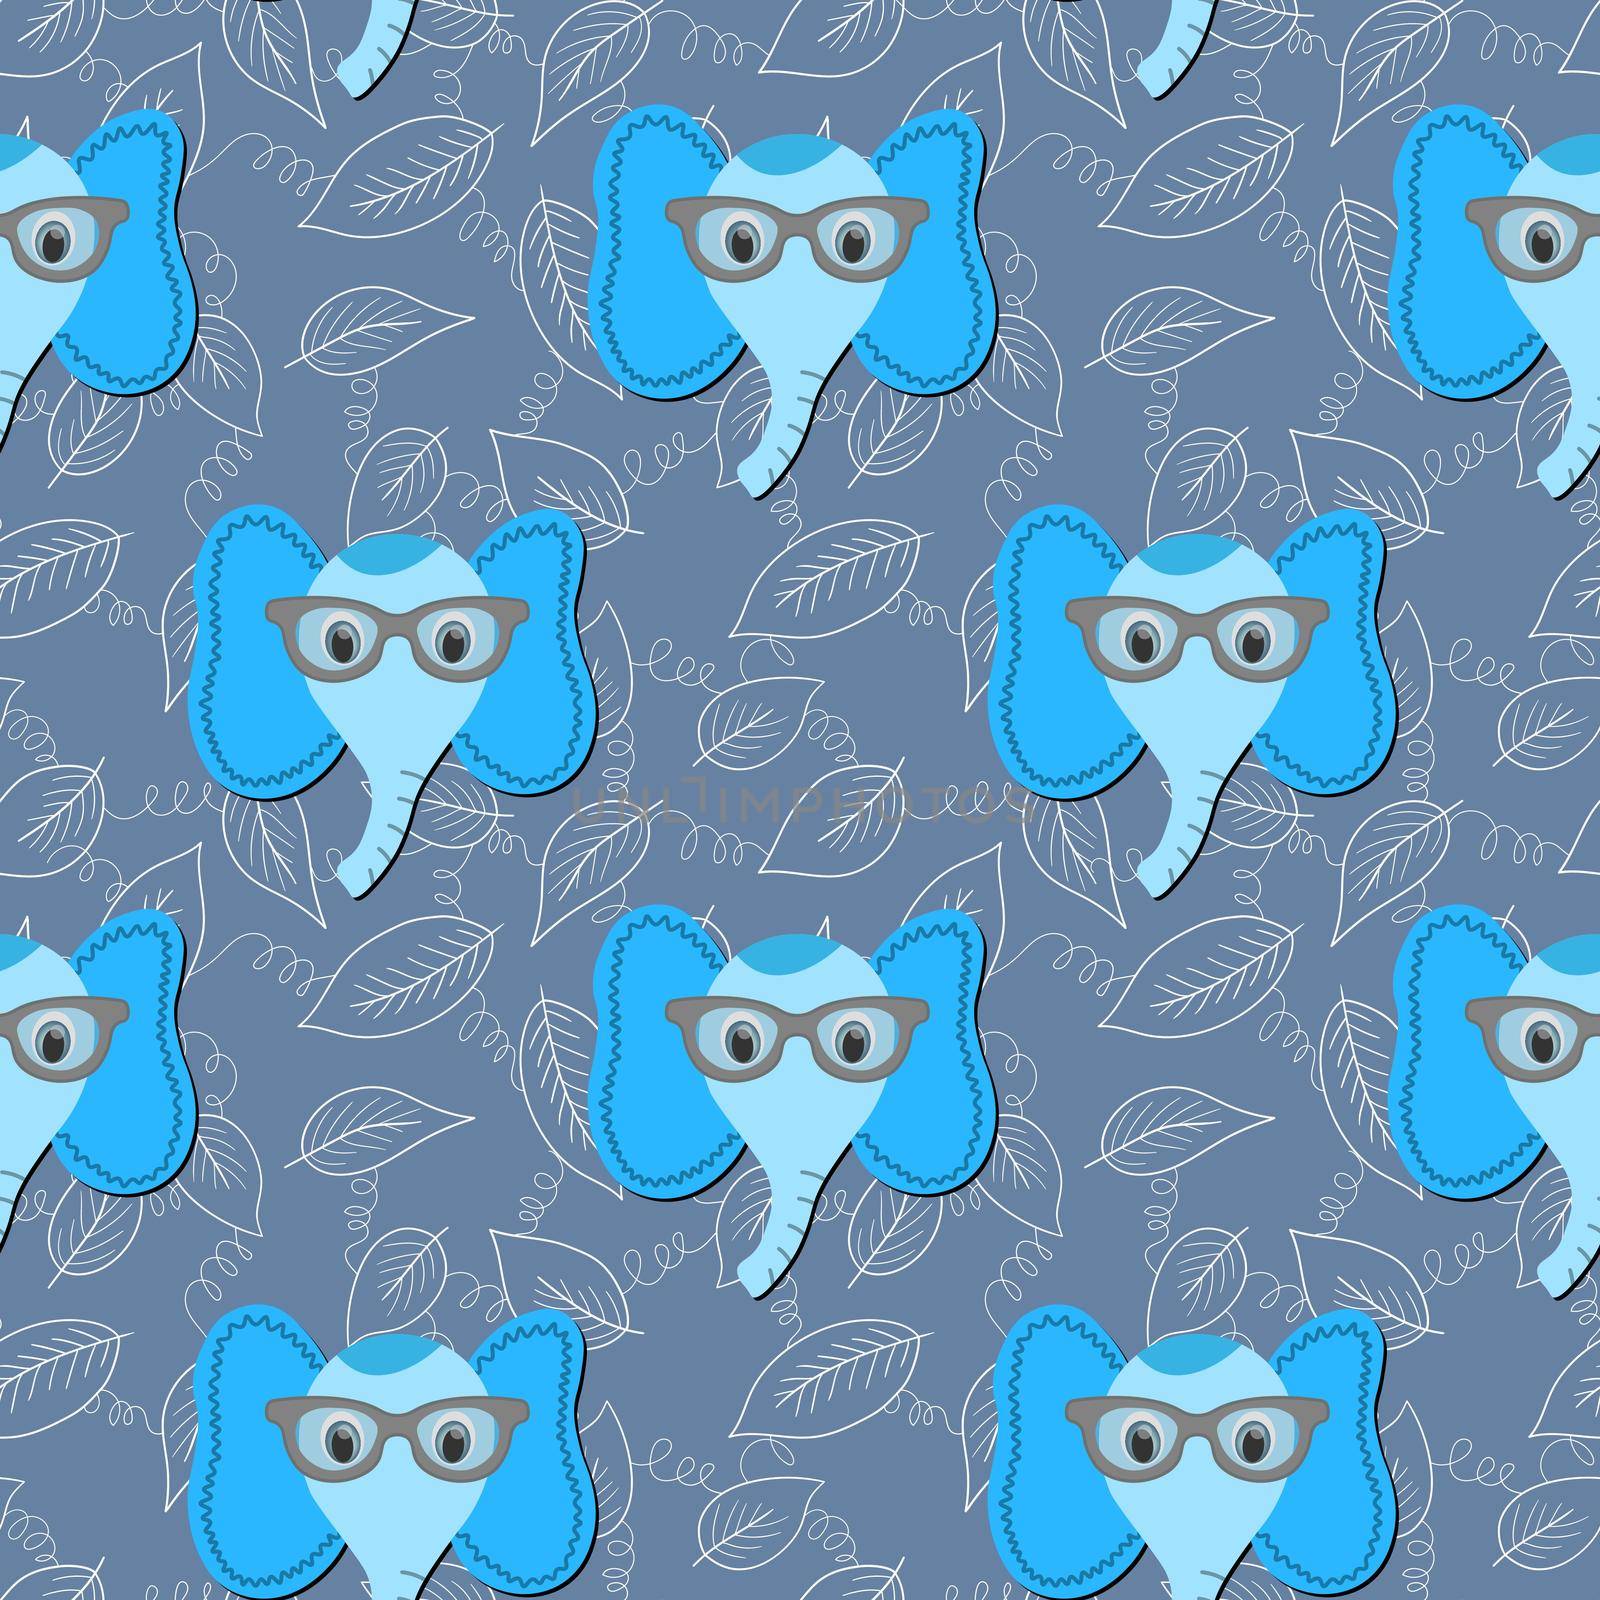 Seamless pattern with cute blue elephant face in sunglasses on floral background. Vector flat animals colorful illustration for kids. Adorable cartoon character. Design for card, fabric, textile.